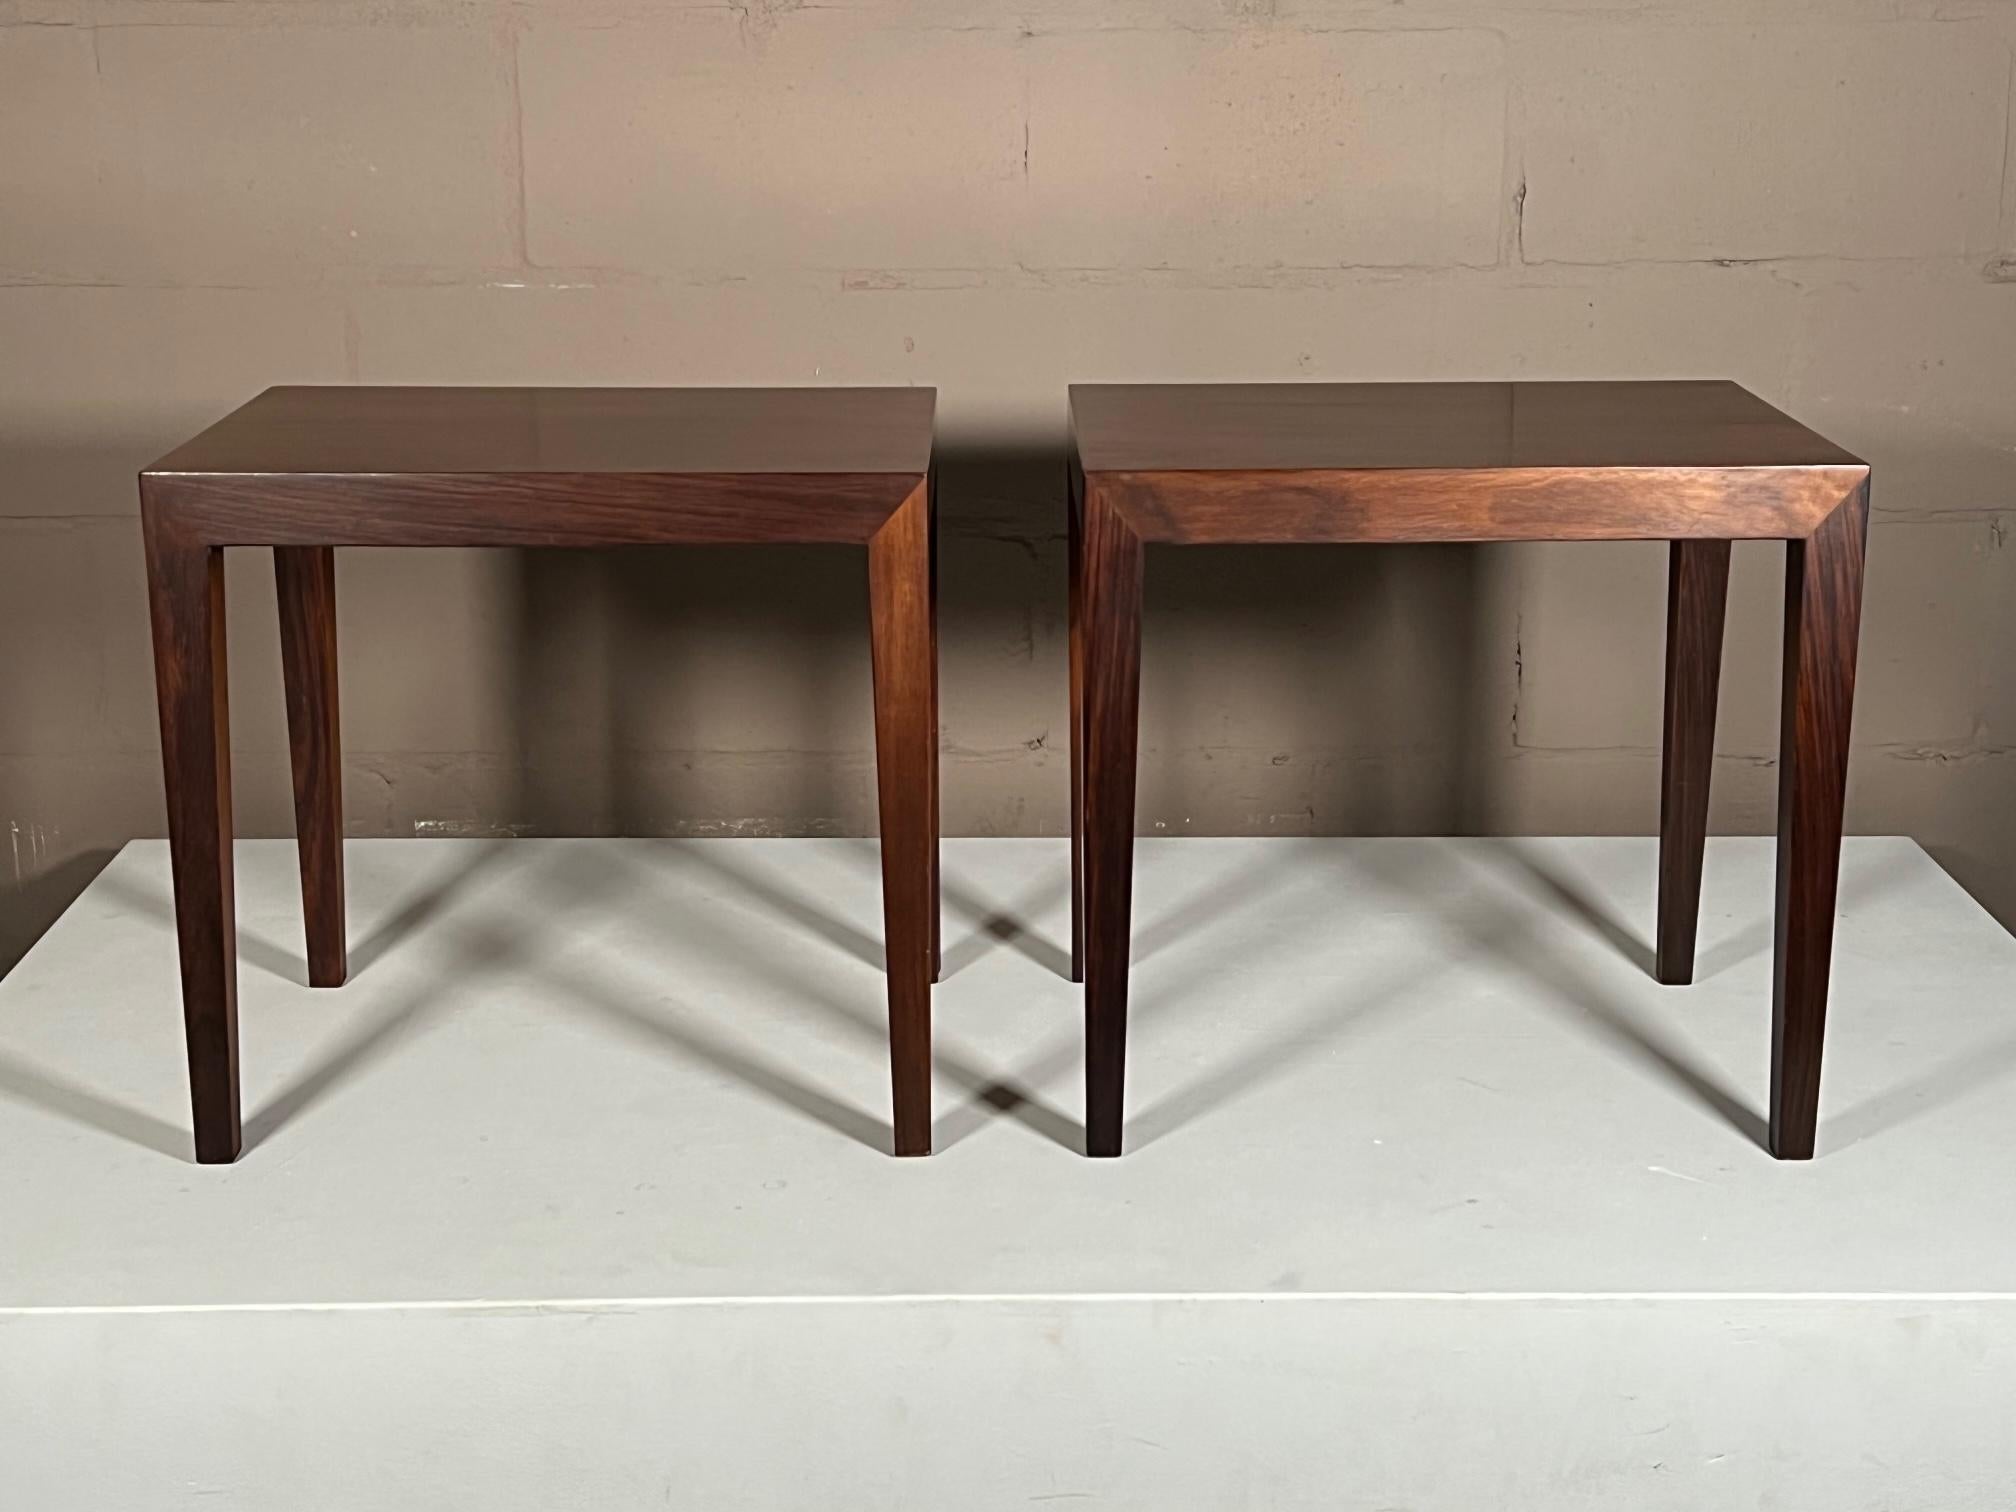 Fantastic pair of side or pedestal tables by Severin Hansen, produced in Denmark in the 1960's. Very elegant simple forms with tapering legs and mitered corners, these tables have a strong presence and architectural feel. This pair has a rich patina